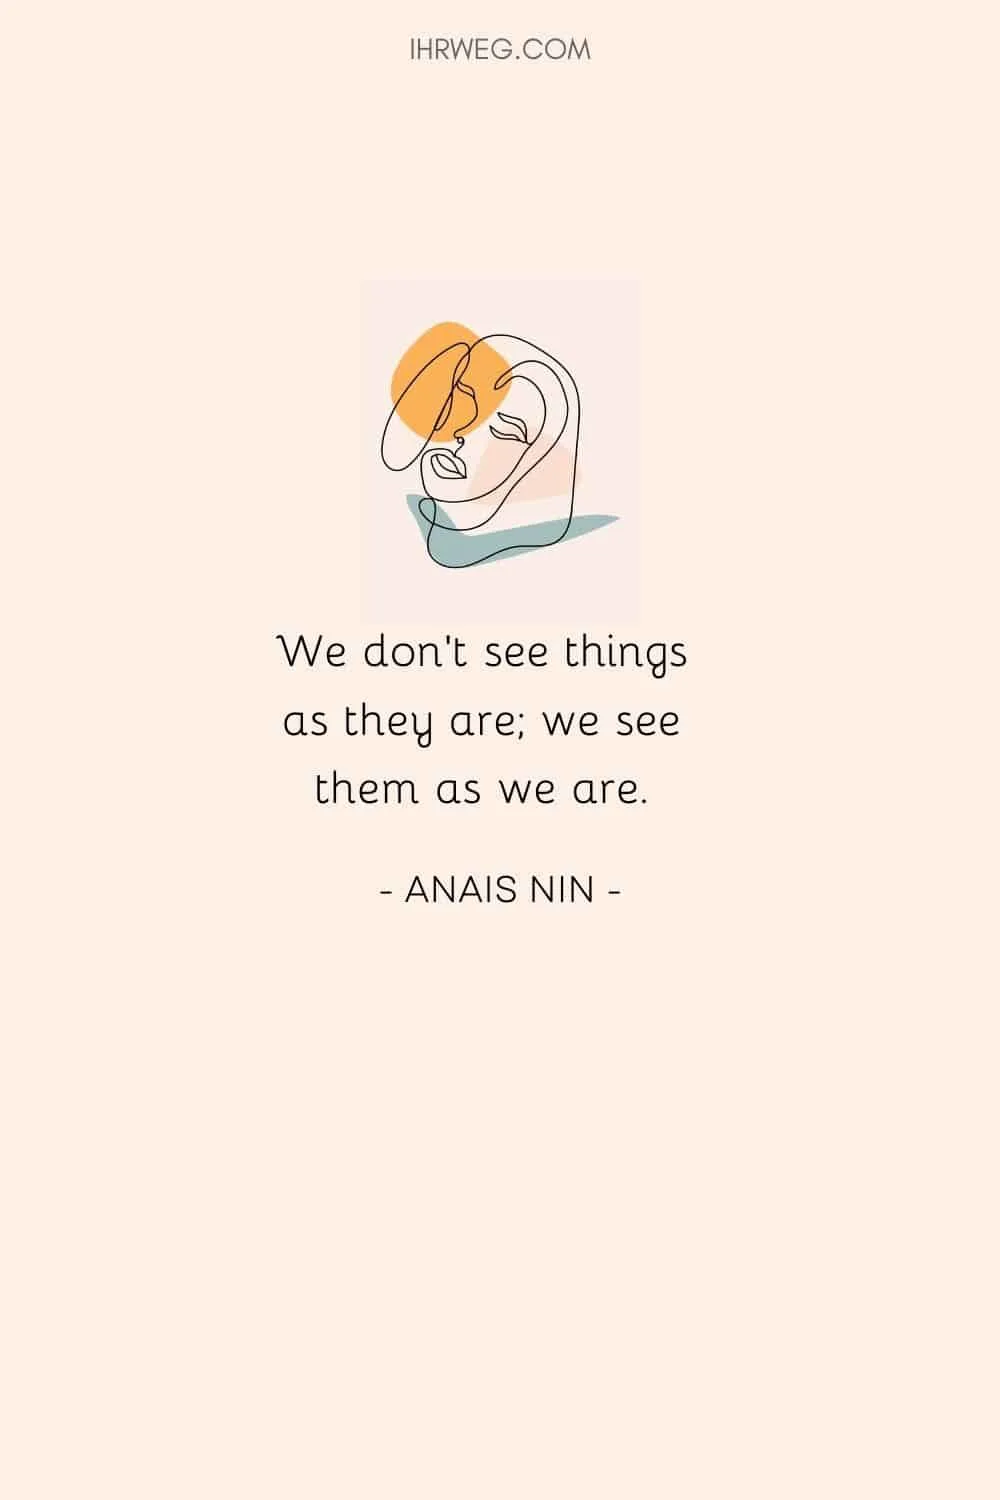 We don't see things as they as, we see them as we are